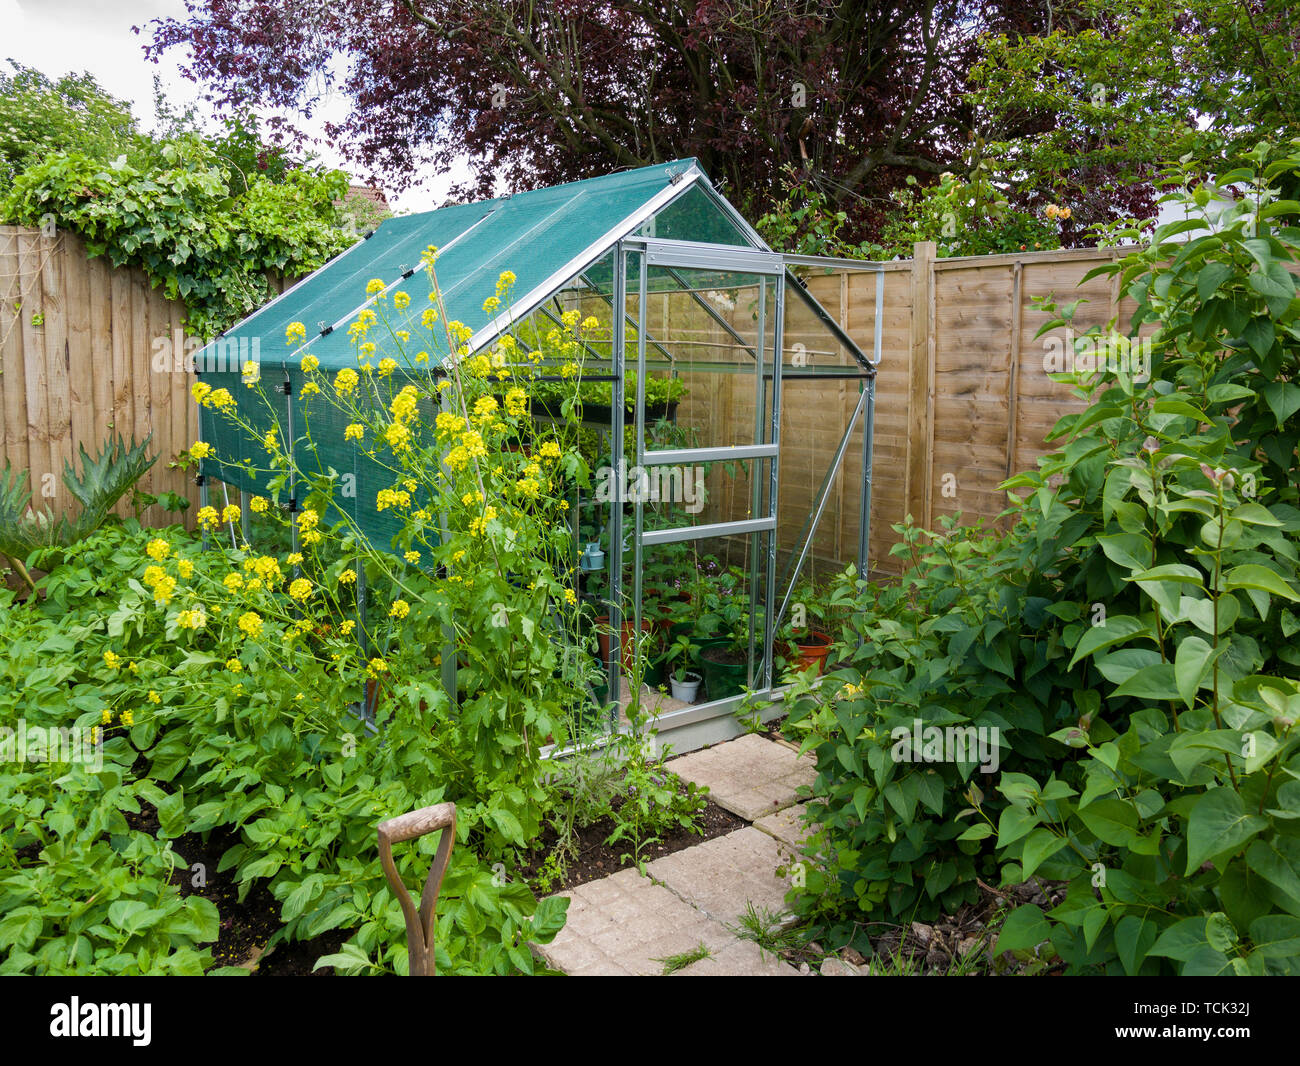 An amateur gardener's vegetable garden and greenhouse in early summer. Stock Photo